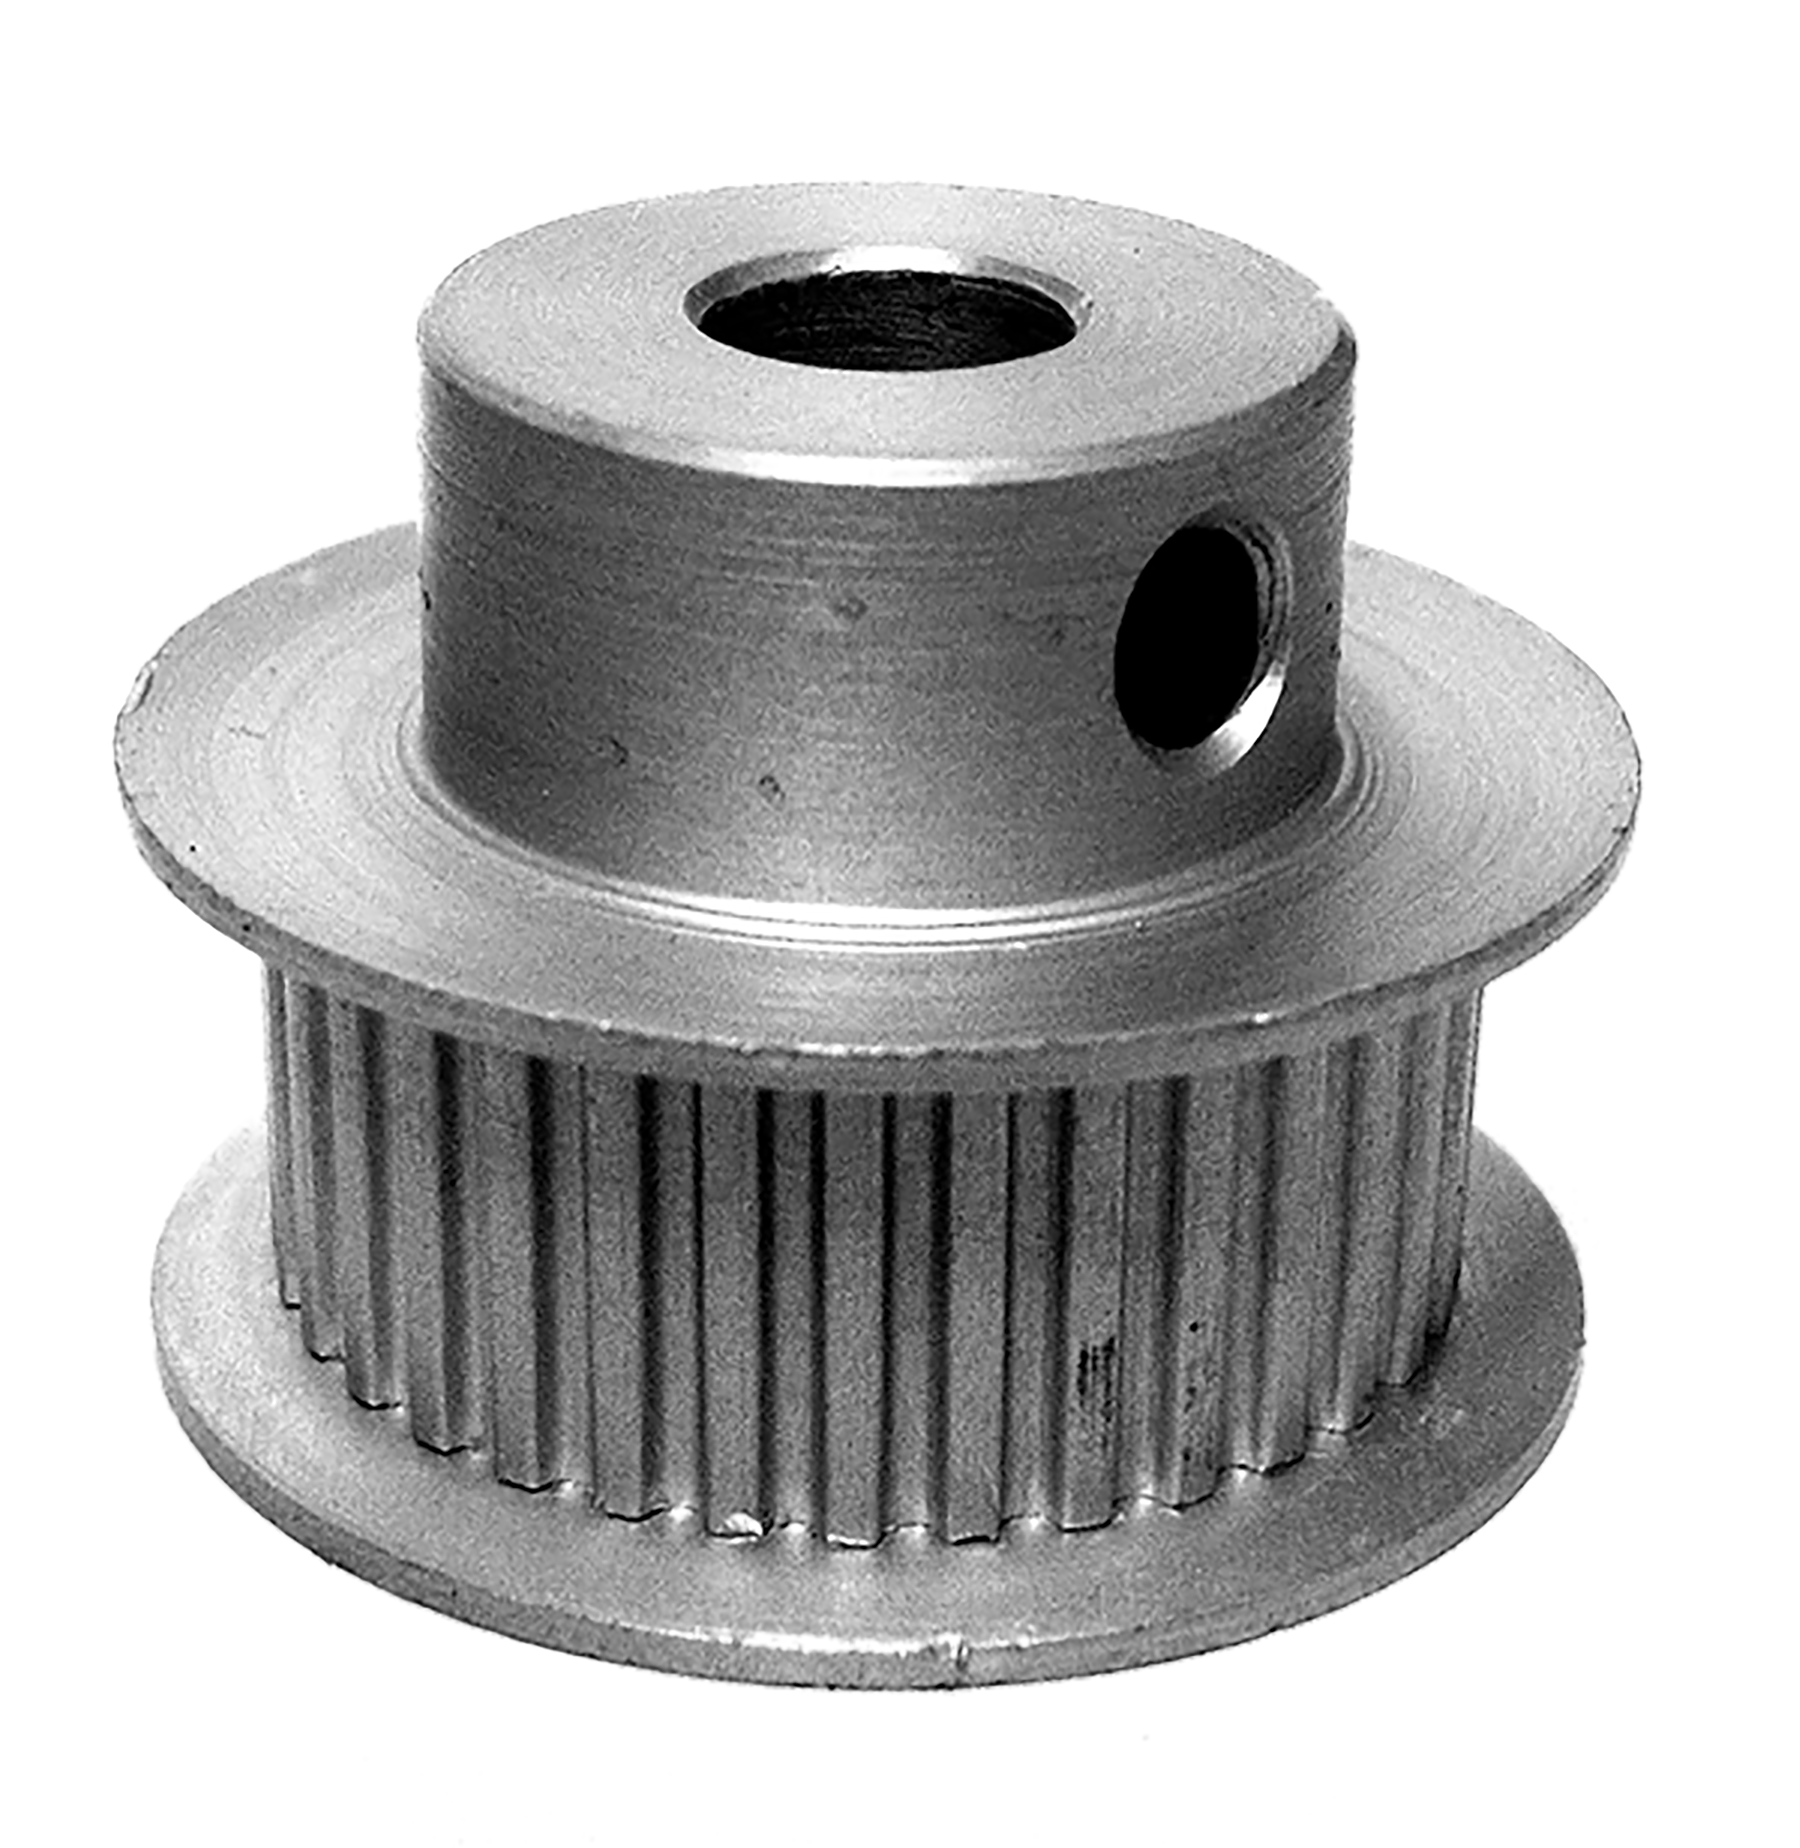 42LT312-6FA3 - Aluminum Imperial Pitch Pulleys